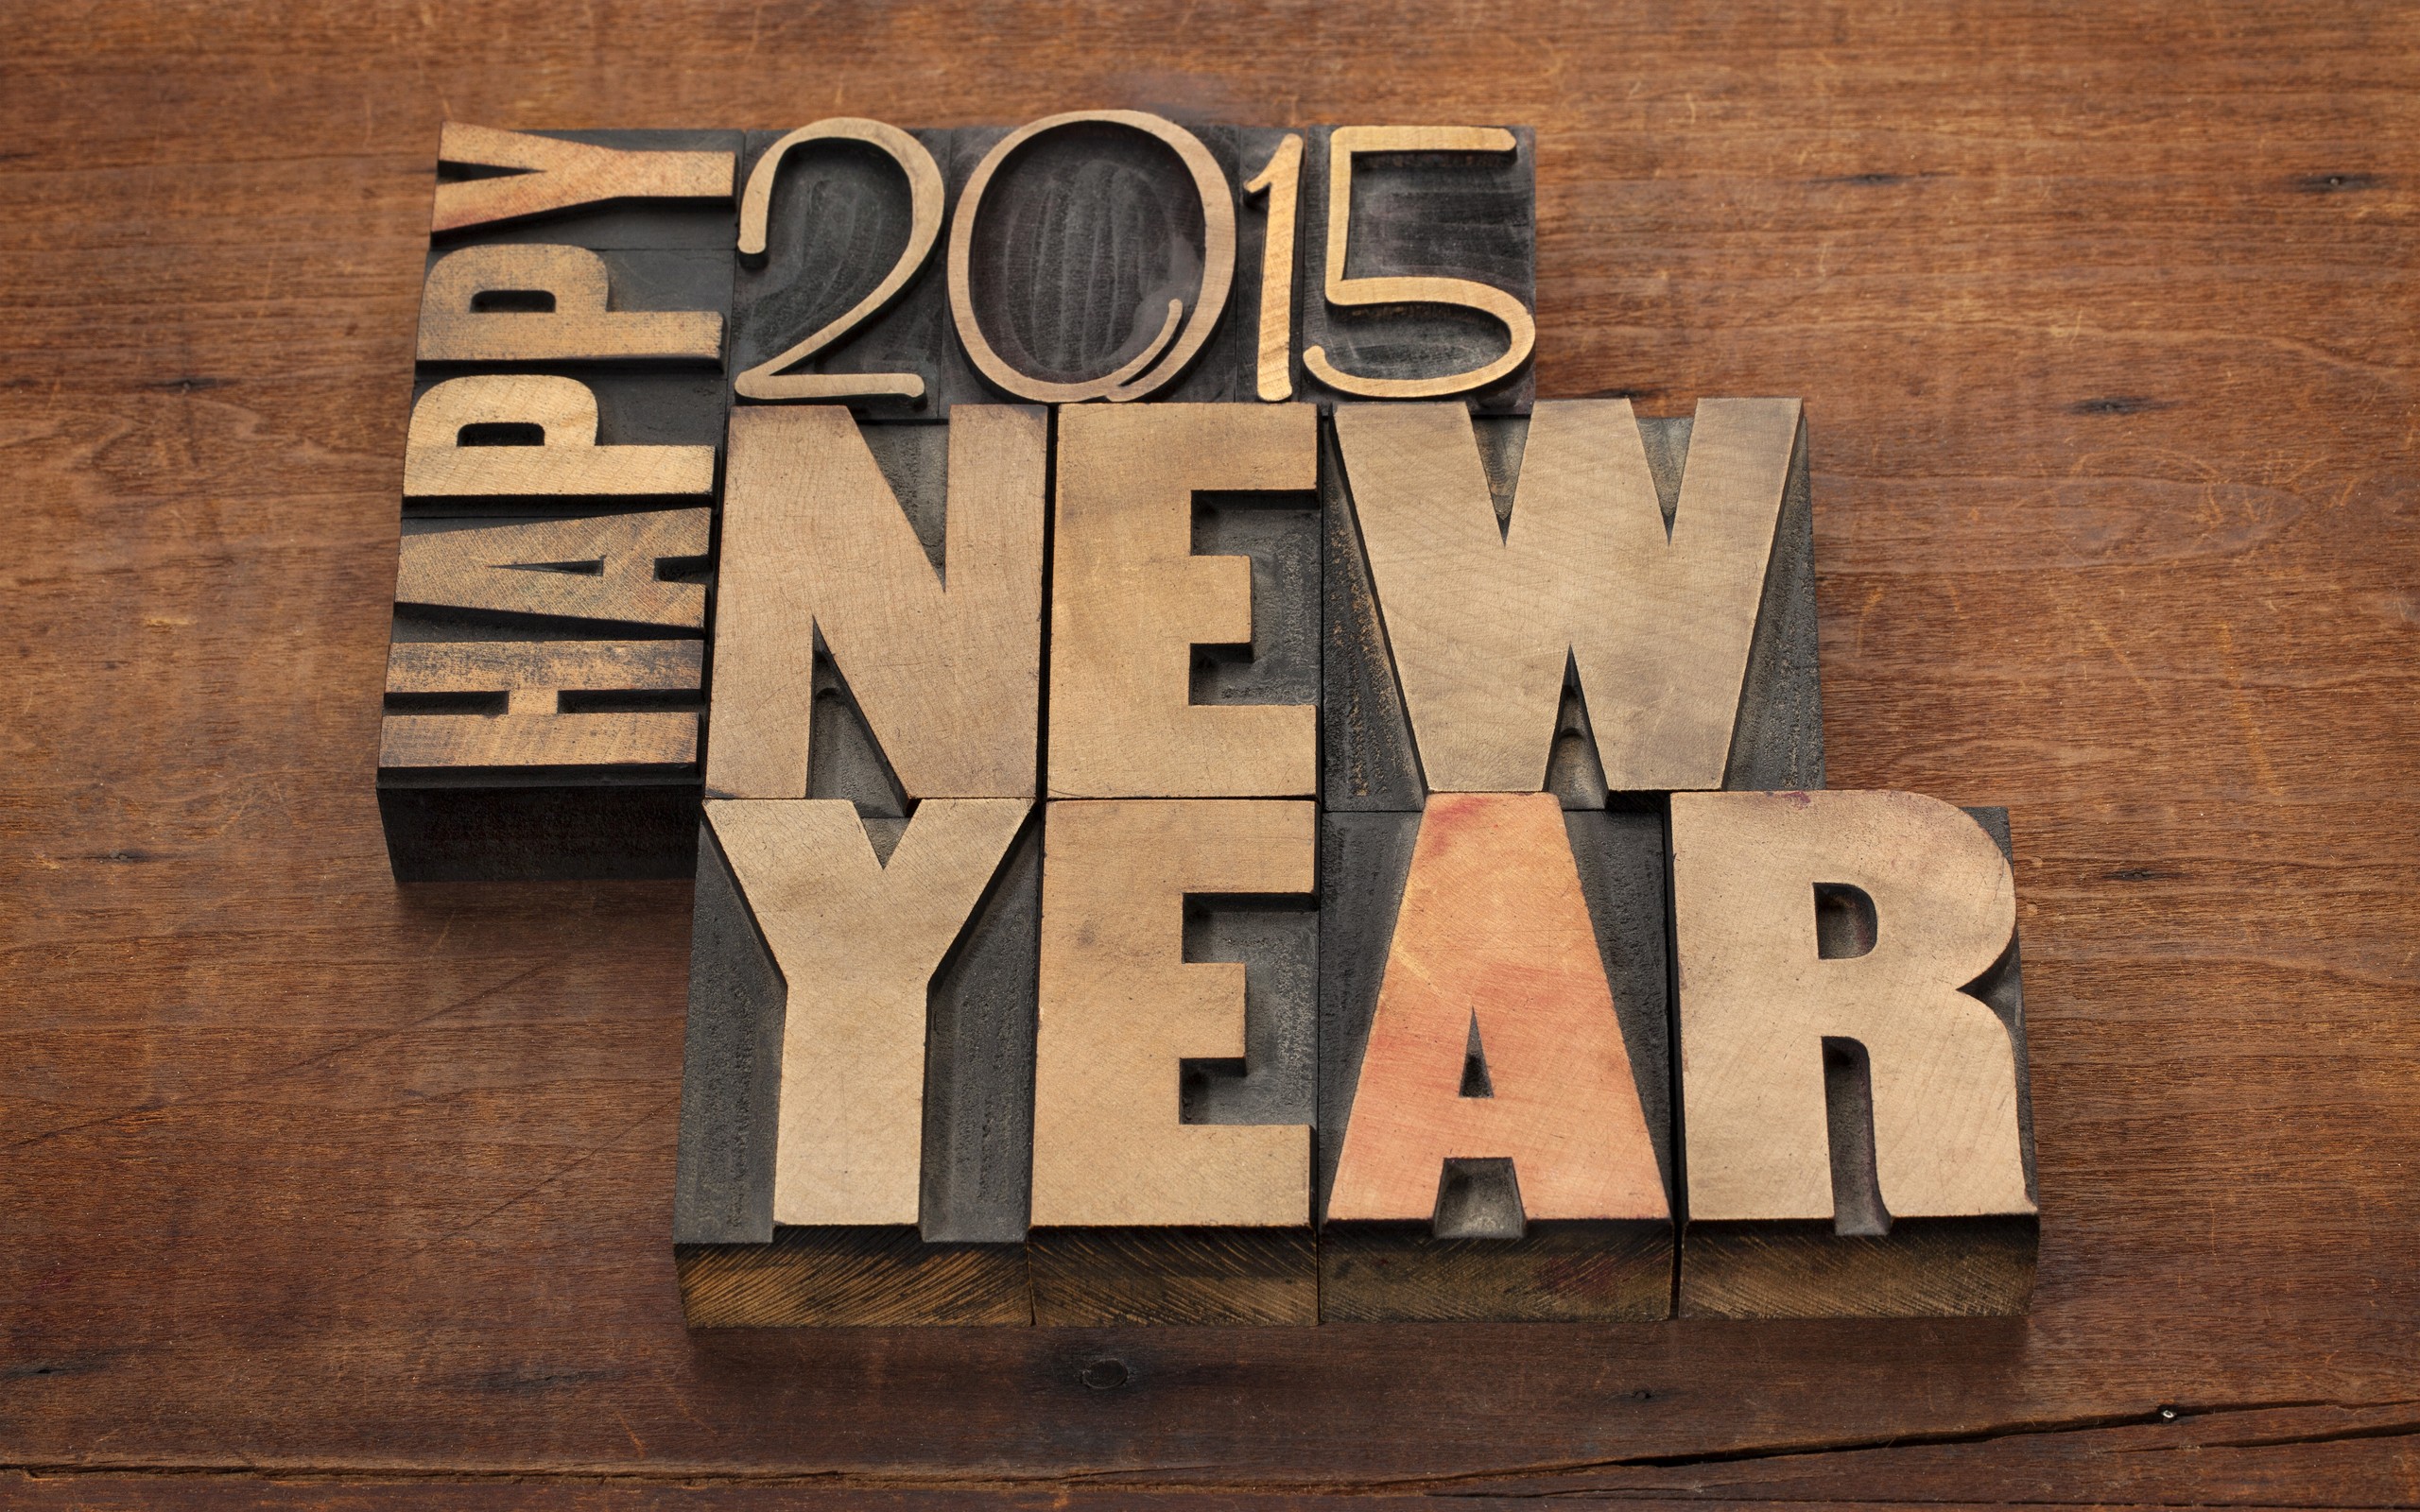 General 2560x1600 New Year wooden surface 2015 (Year) holiday